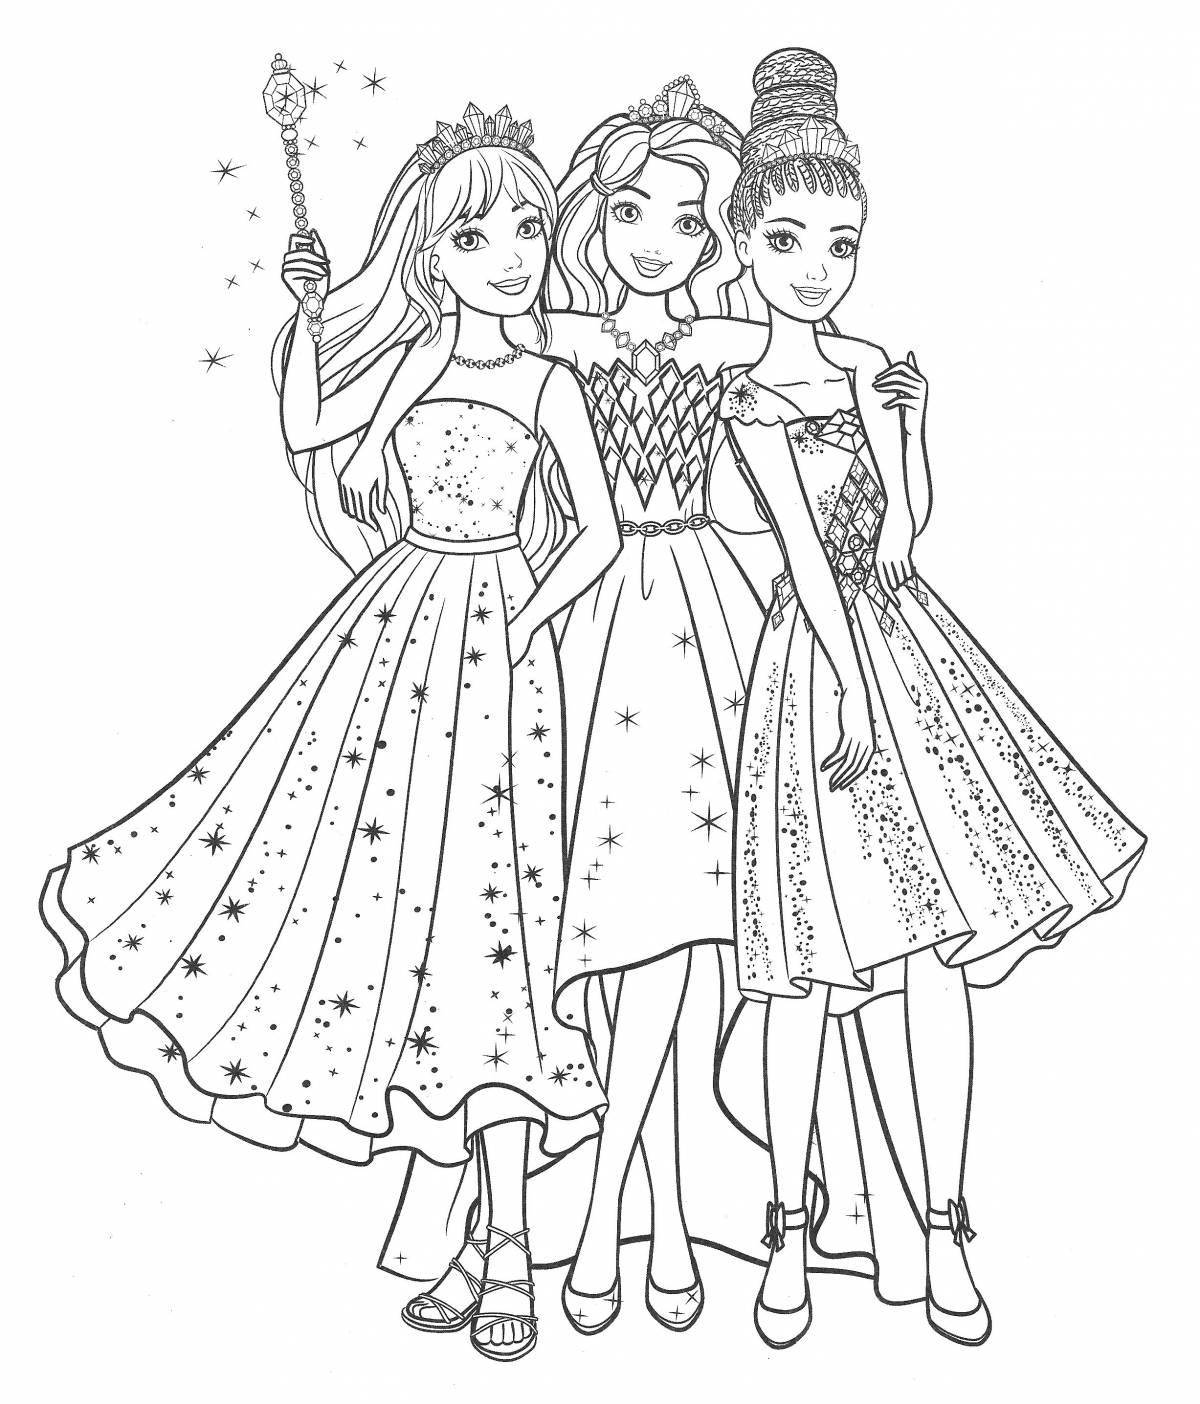 Three friends shining coloring book